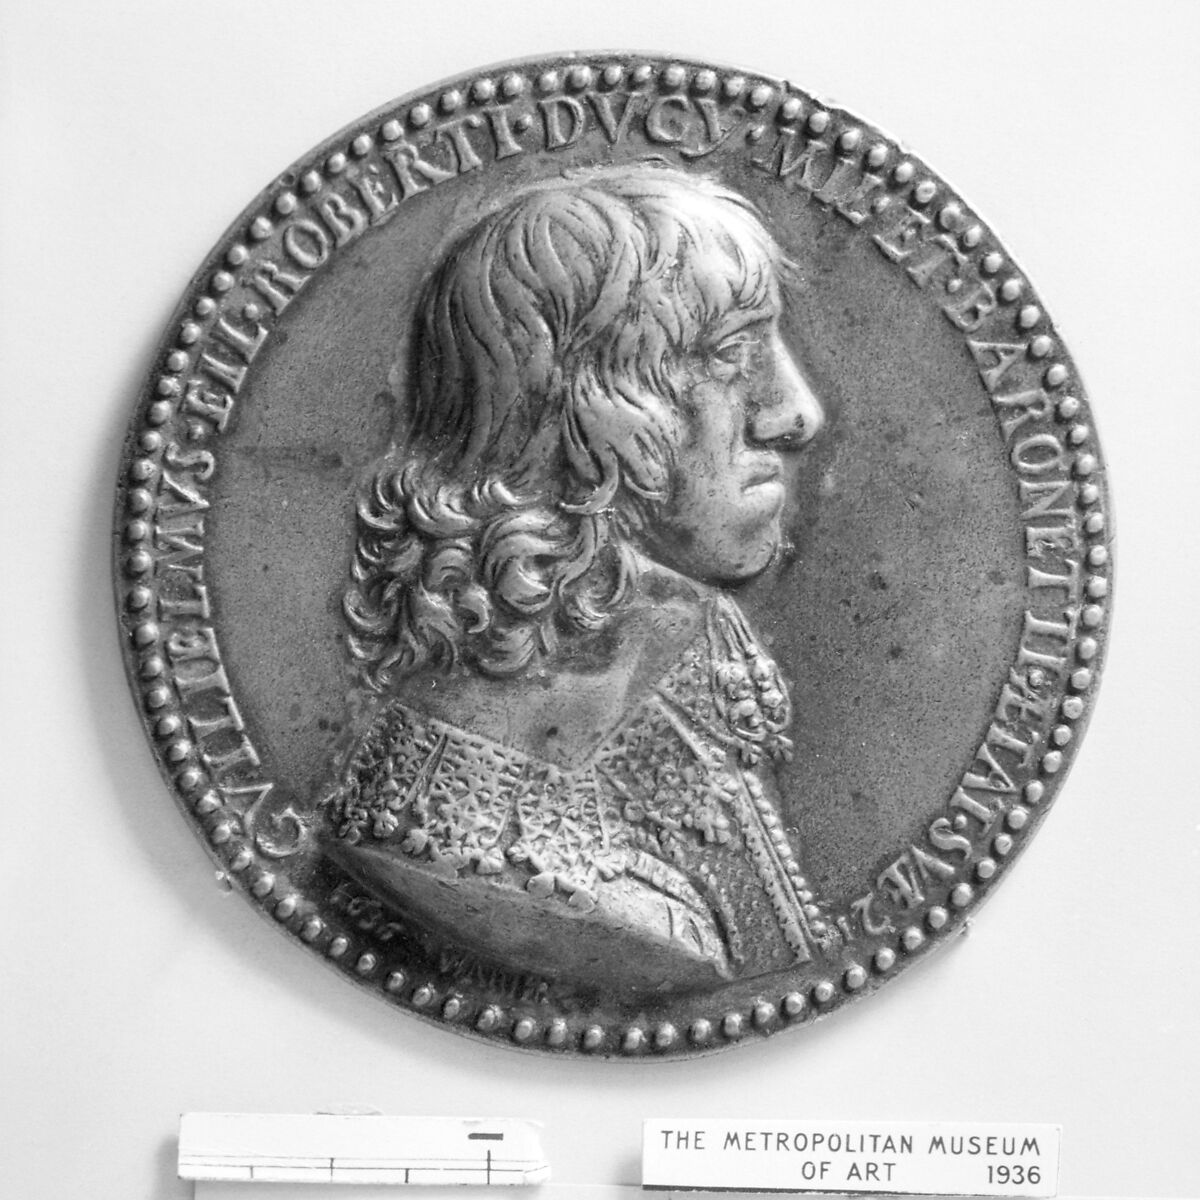 William Ducy, later Third Baronet and Viscount Downe (1615-1679), Medalist: Claude Varin (active 1630–54), Bronze, traces of gilding, French 